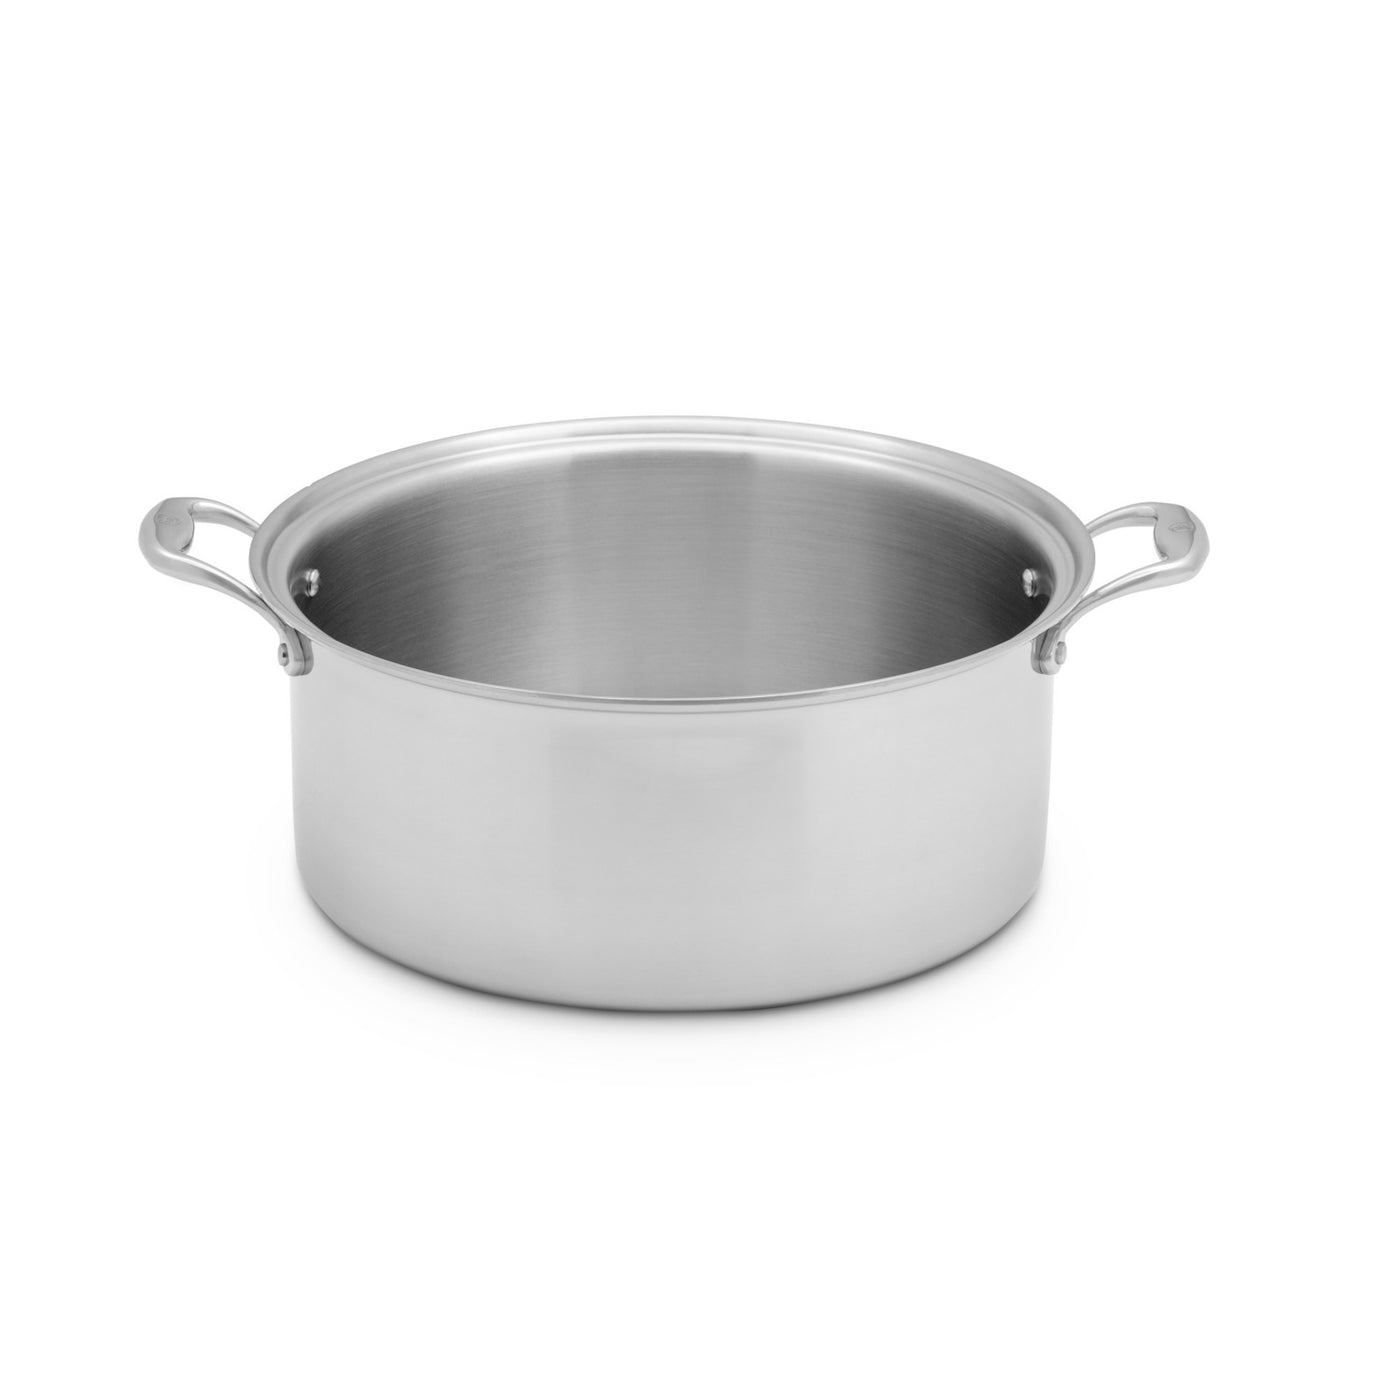 Heritage Steel Titanium Series 12 Quart Stock Pot, 5-Ply Clad Stainless  Steel Cookware with 316Ti, Made in USA